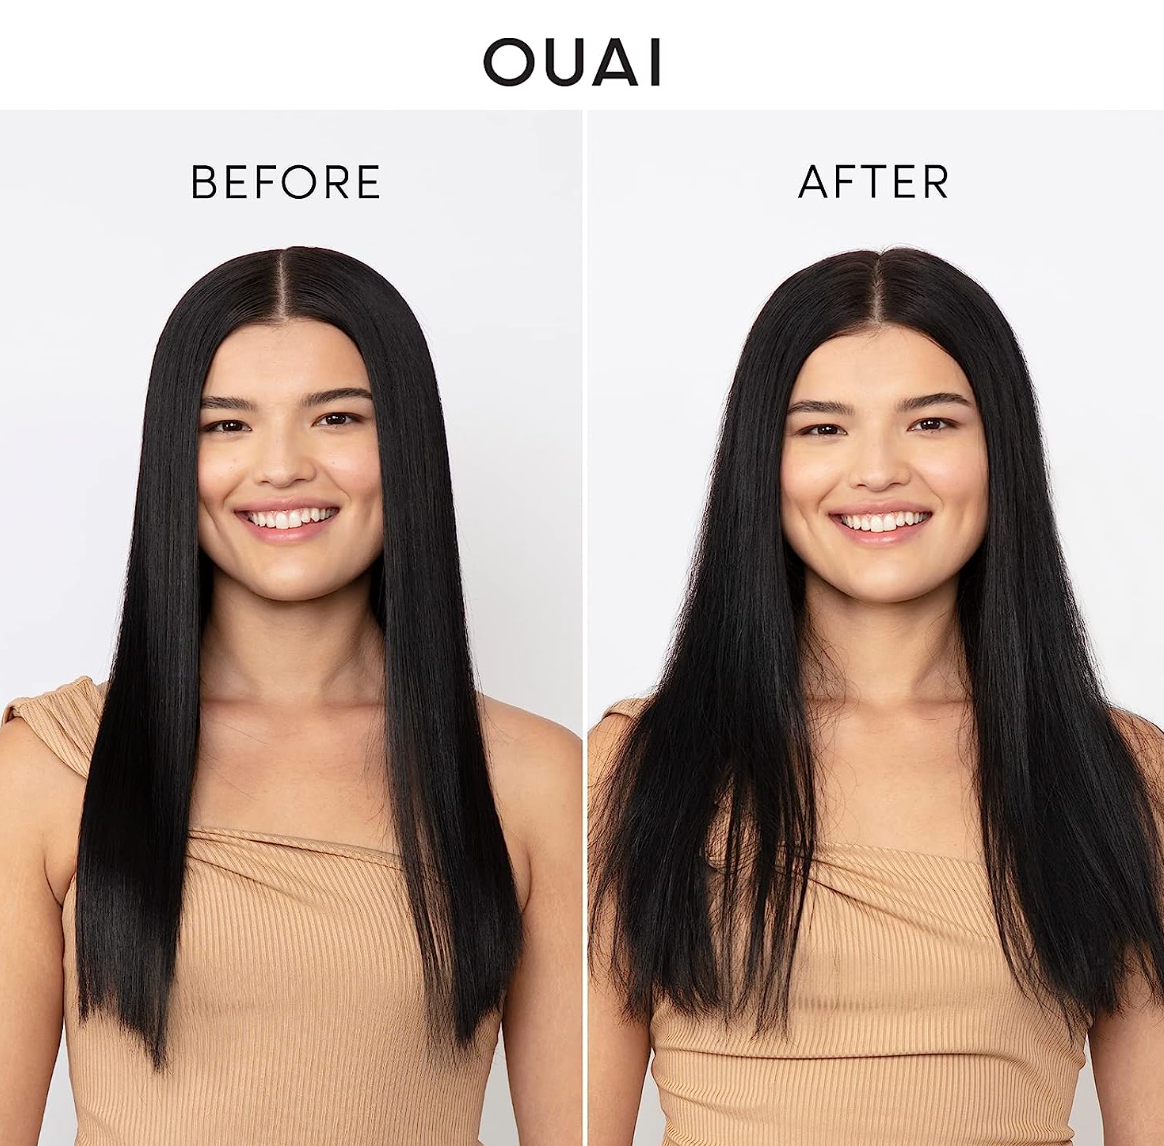 OUAI Super Dry Shampoo. Cleanse, Remove Product Buildup and Refresh Hair without Water. Adds Instant Volume and Shine to Fine, Oily Hair. Free from Parabens and Sulfates (4.2 Oz)